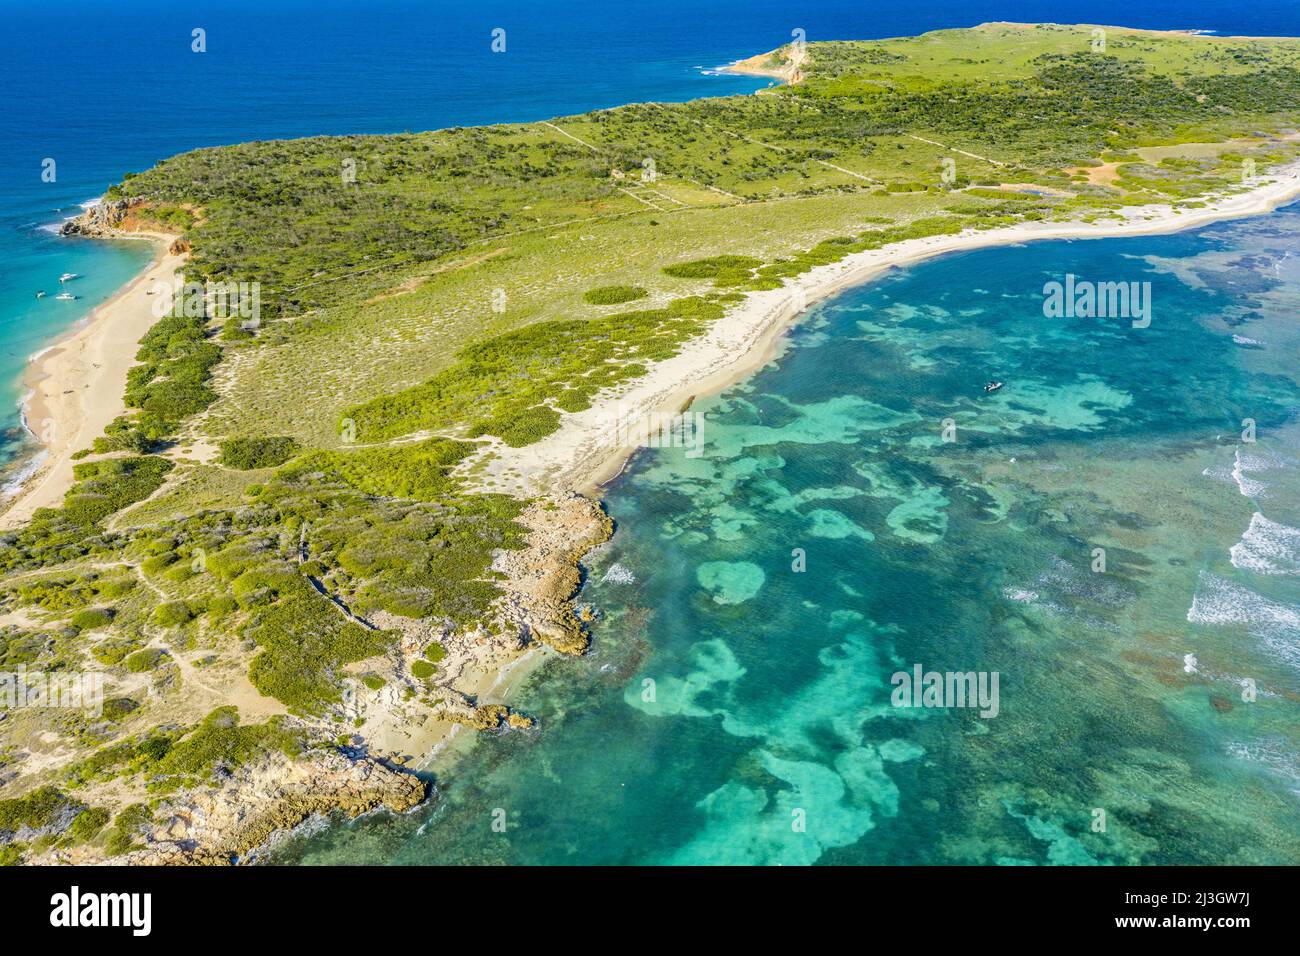 America, Caribbean, Lesser Antilles, French West Indies, Saint-Martin, National Nature Reserve, Tintamarre Island (aerial view) Stock Photo